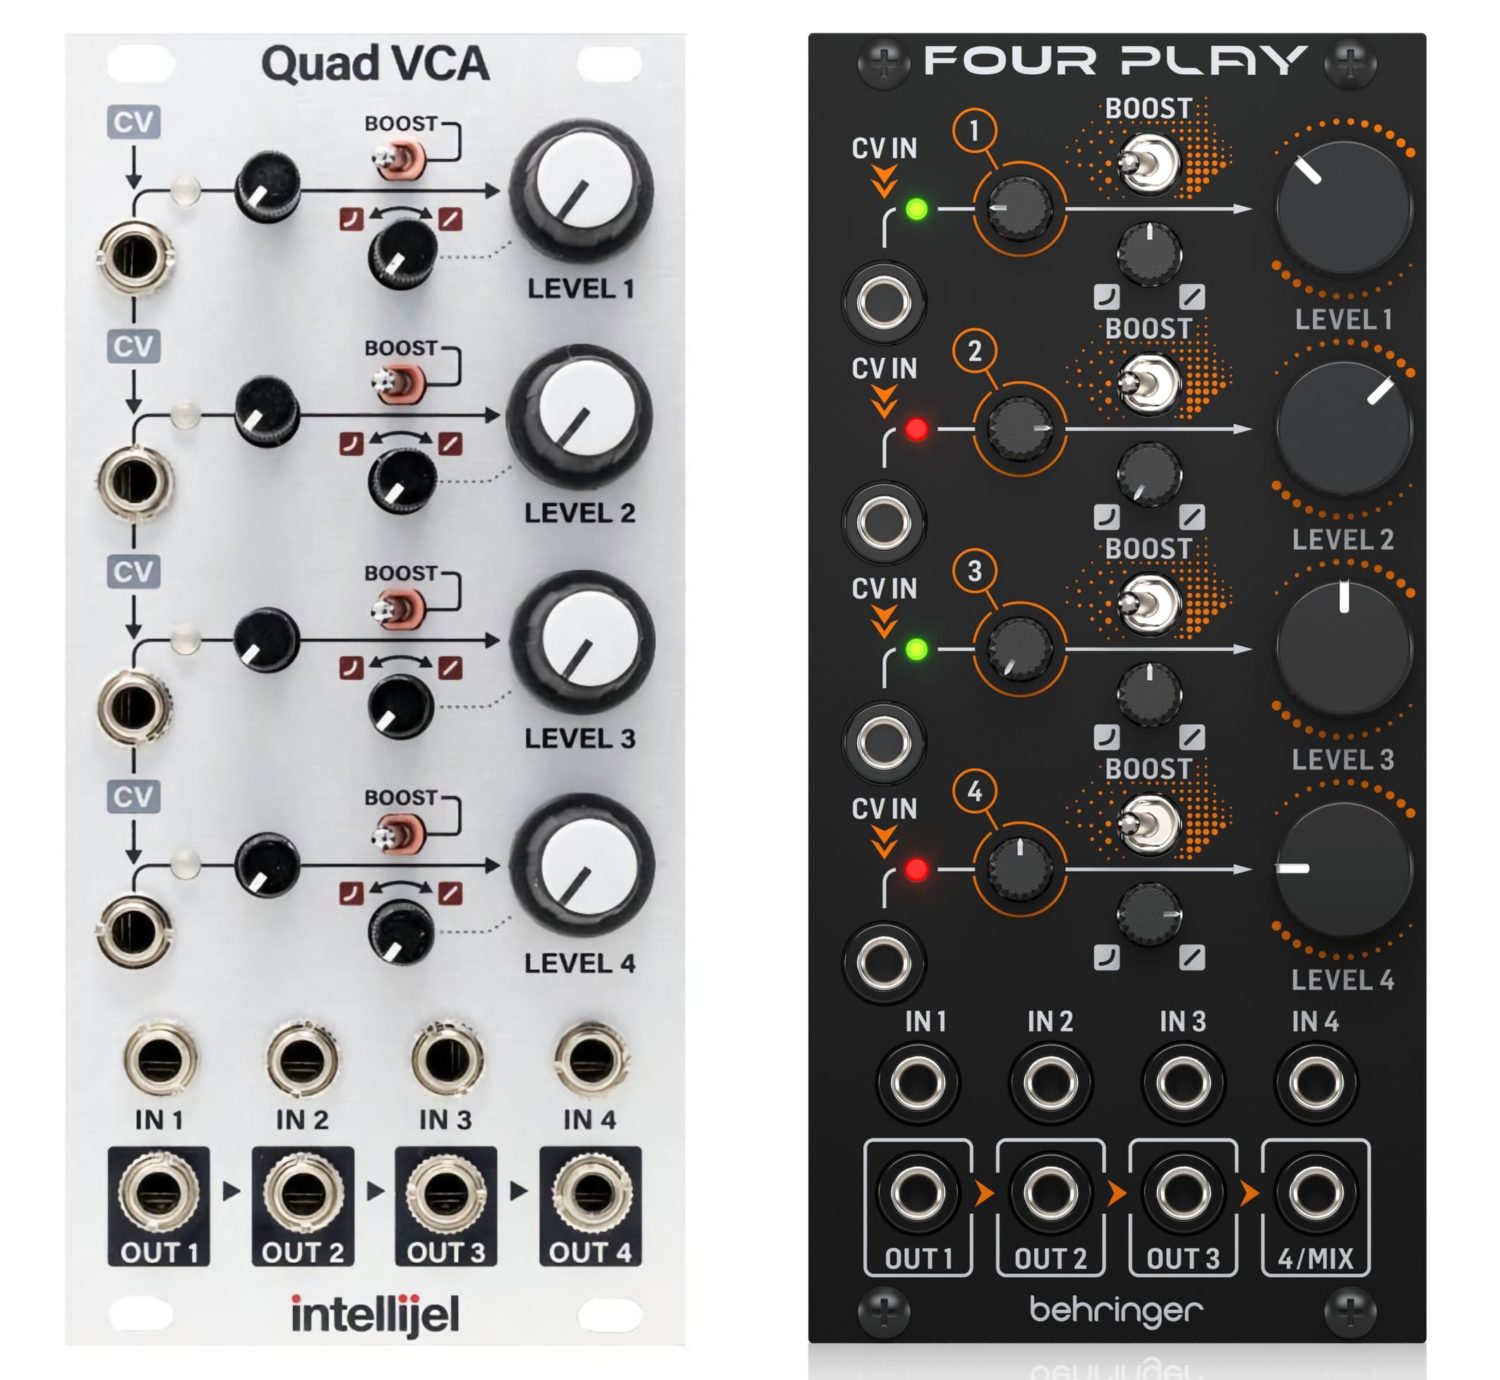 Oversynth releases stylish overlay kits for Behringer's Crave and